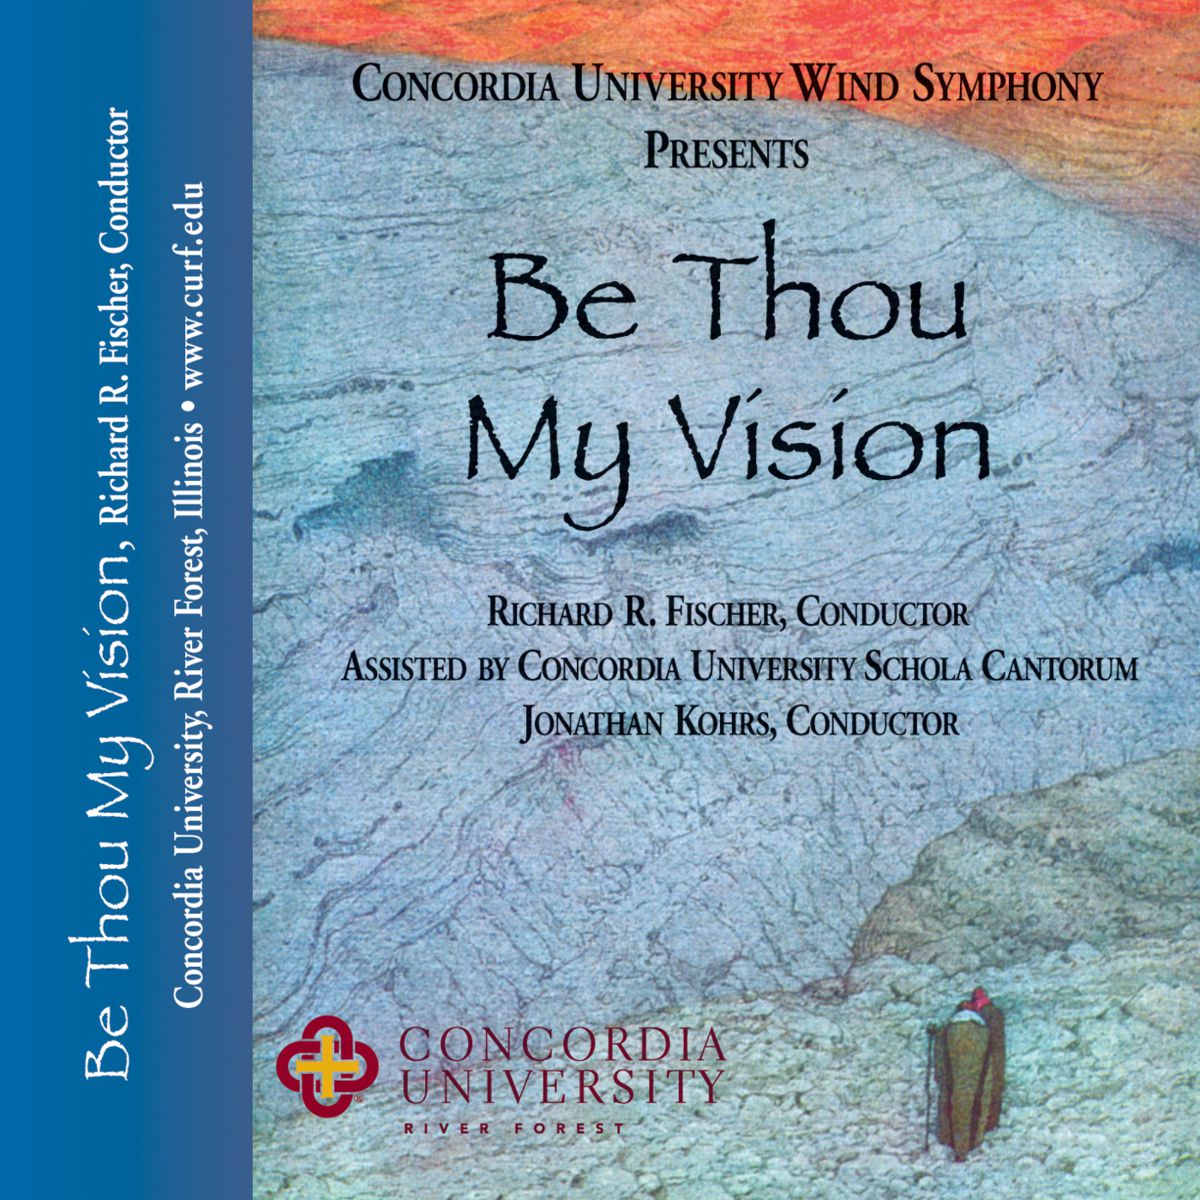 Be Thou My Vision - cliquer ici